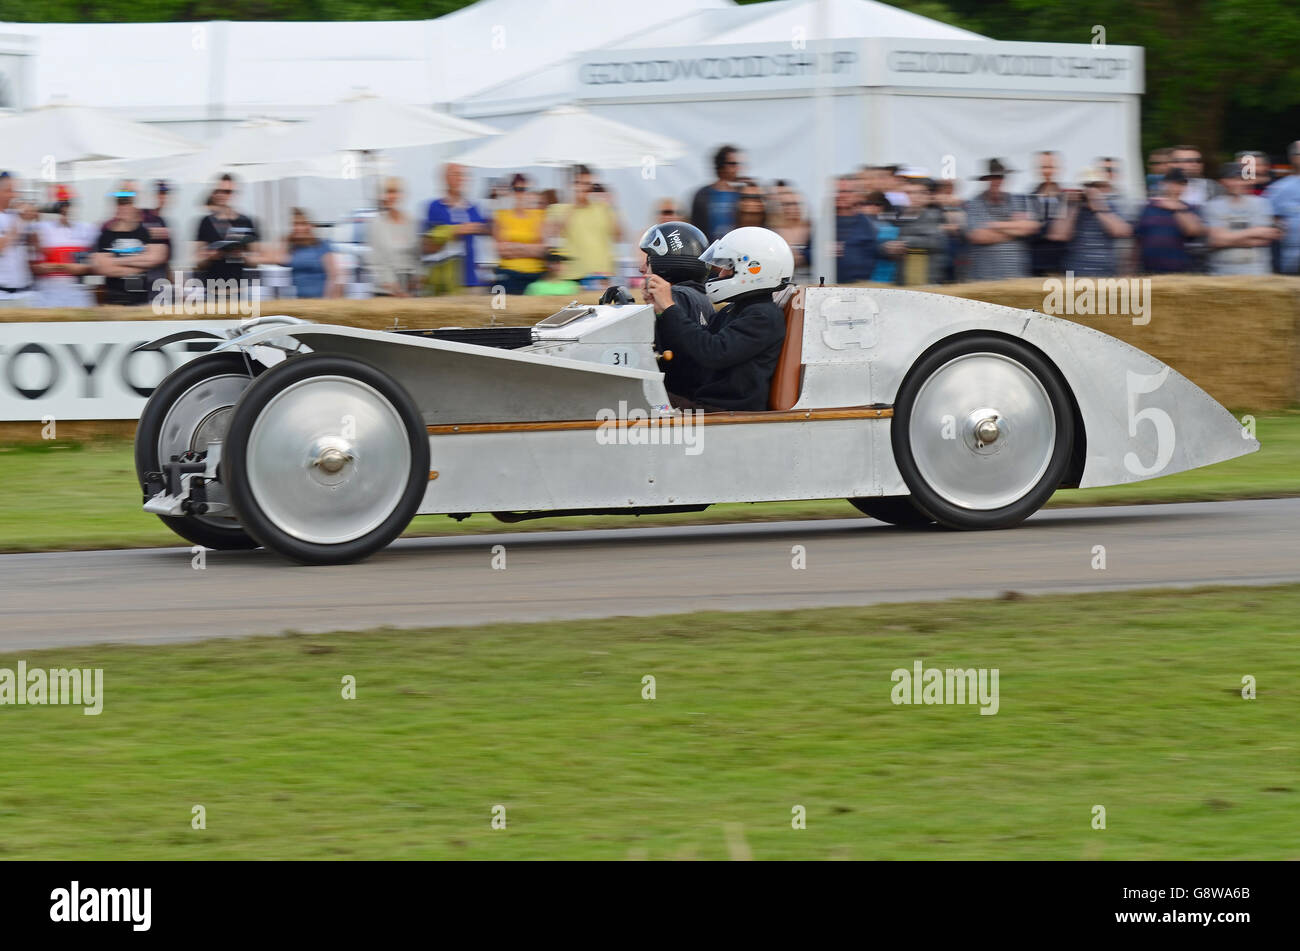 Avions Voisin C6 Laboratoire was a 1923 Grand Prix car, seen racing up the hill at the Goodwood Festival of Speed 2016 Stock Photo